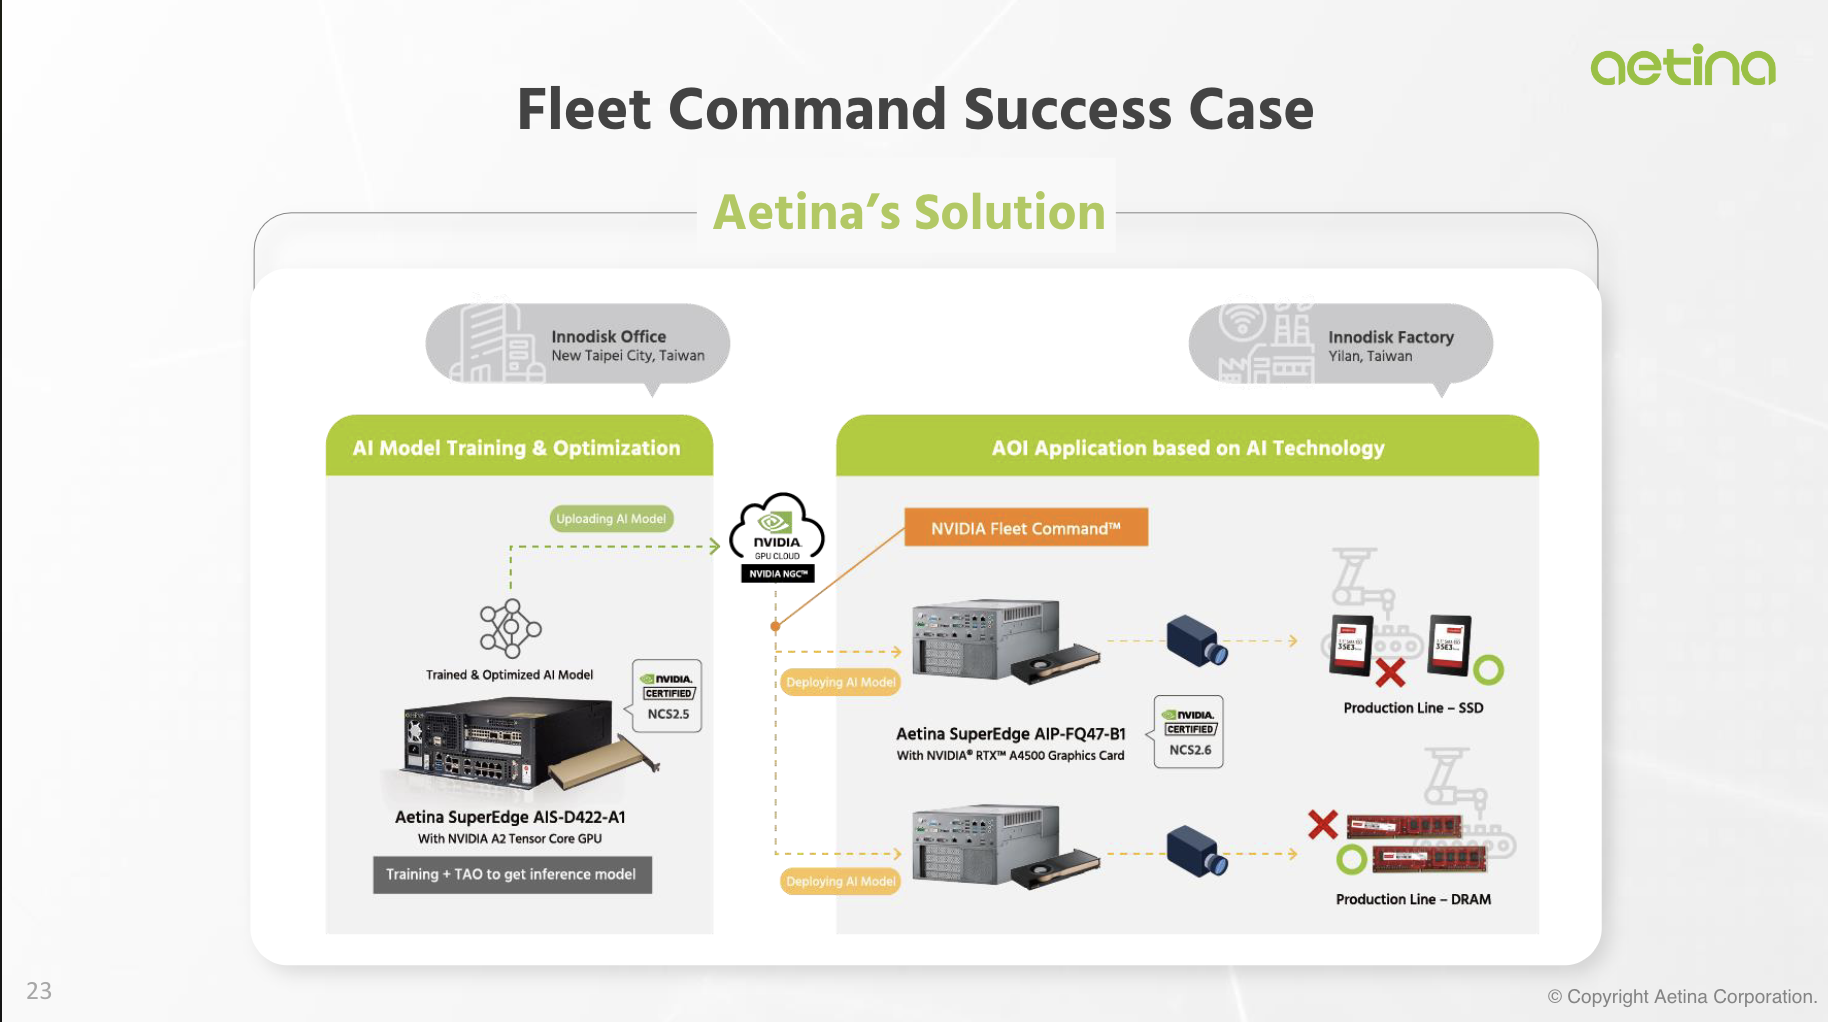 The image illustrates the Aetina solution, which begins with AI model training and optimization with NVIDIA TAO and NVIDIA-Certified systems. The AI deployment phase is next and leverages Aetina SuperEdge hardware with NVIDIA Fleet Command.